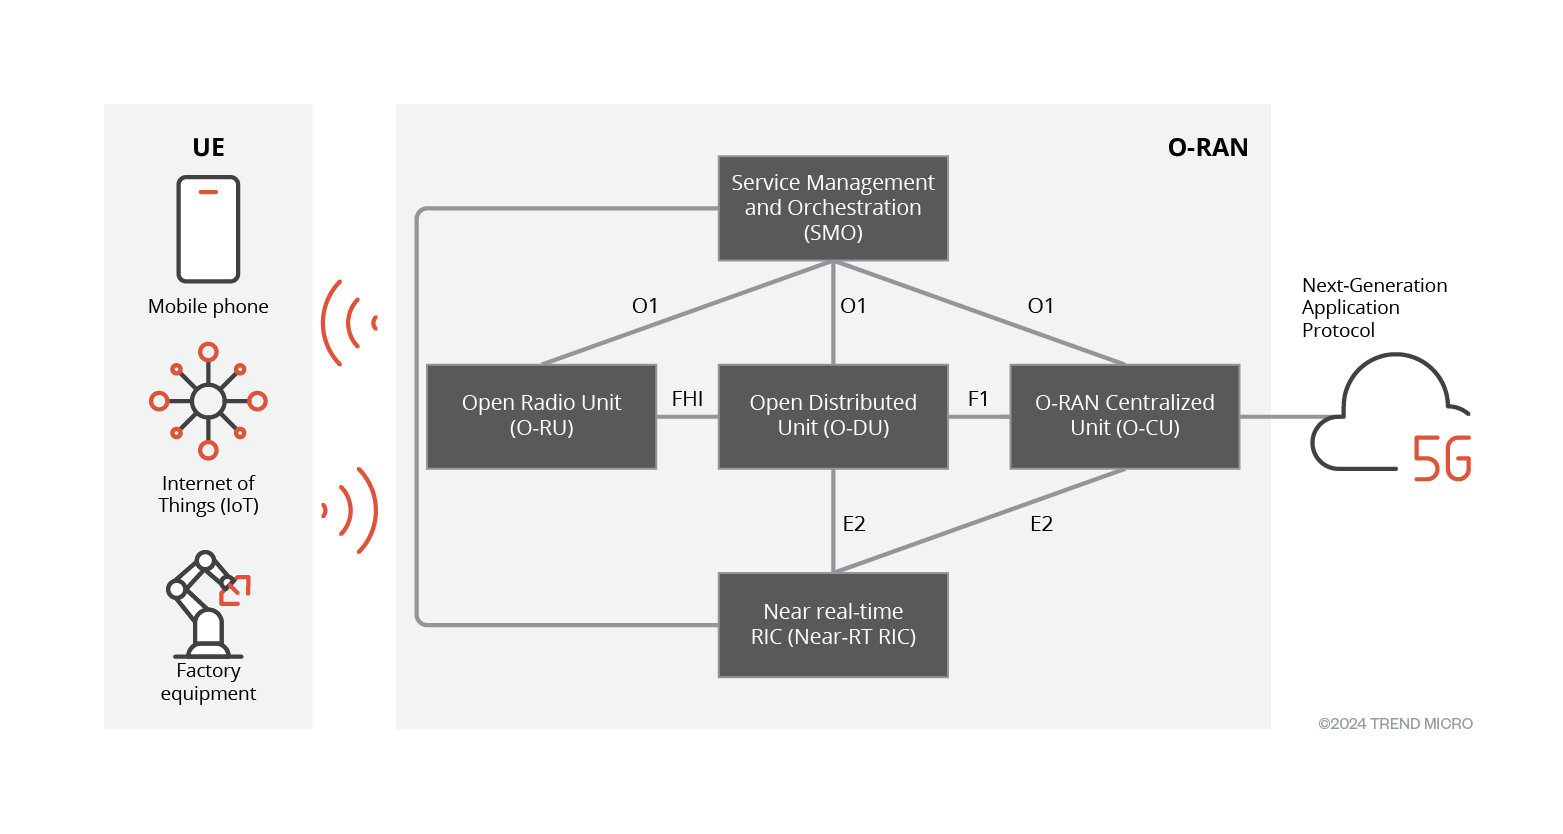 Figure 1. 5G end-to-end architecture with O-RAN